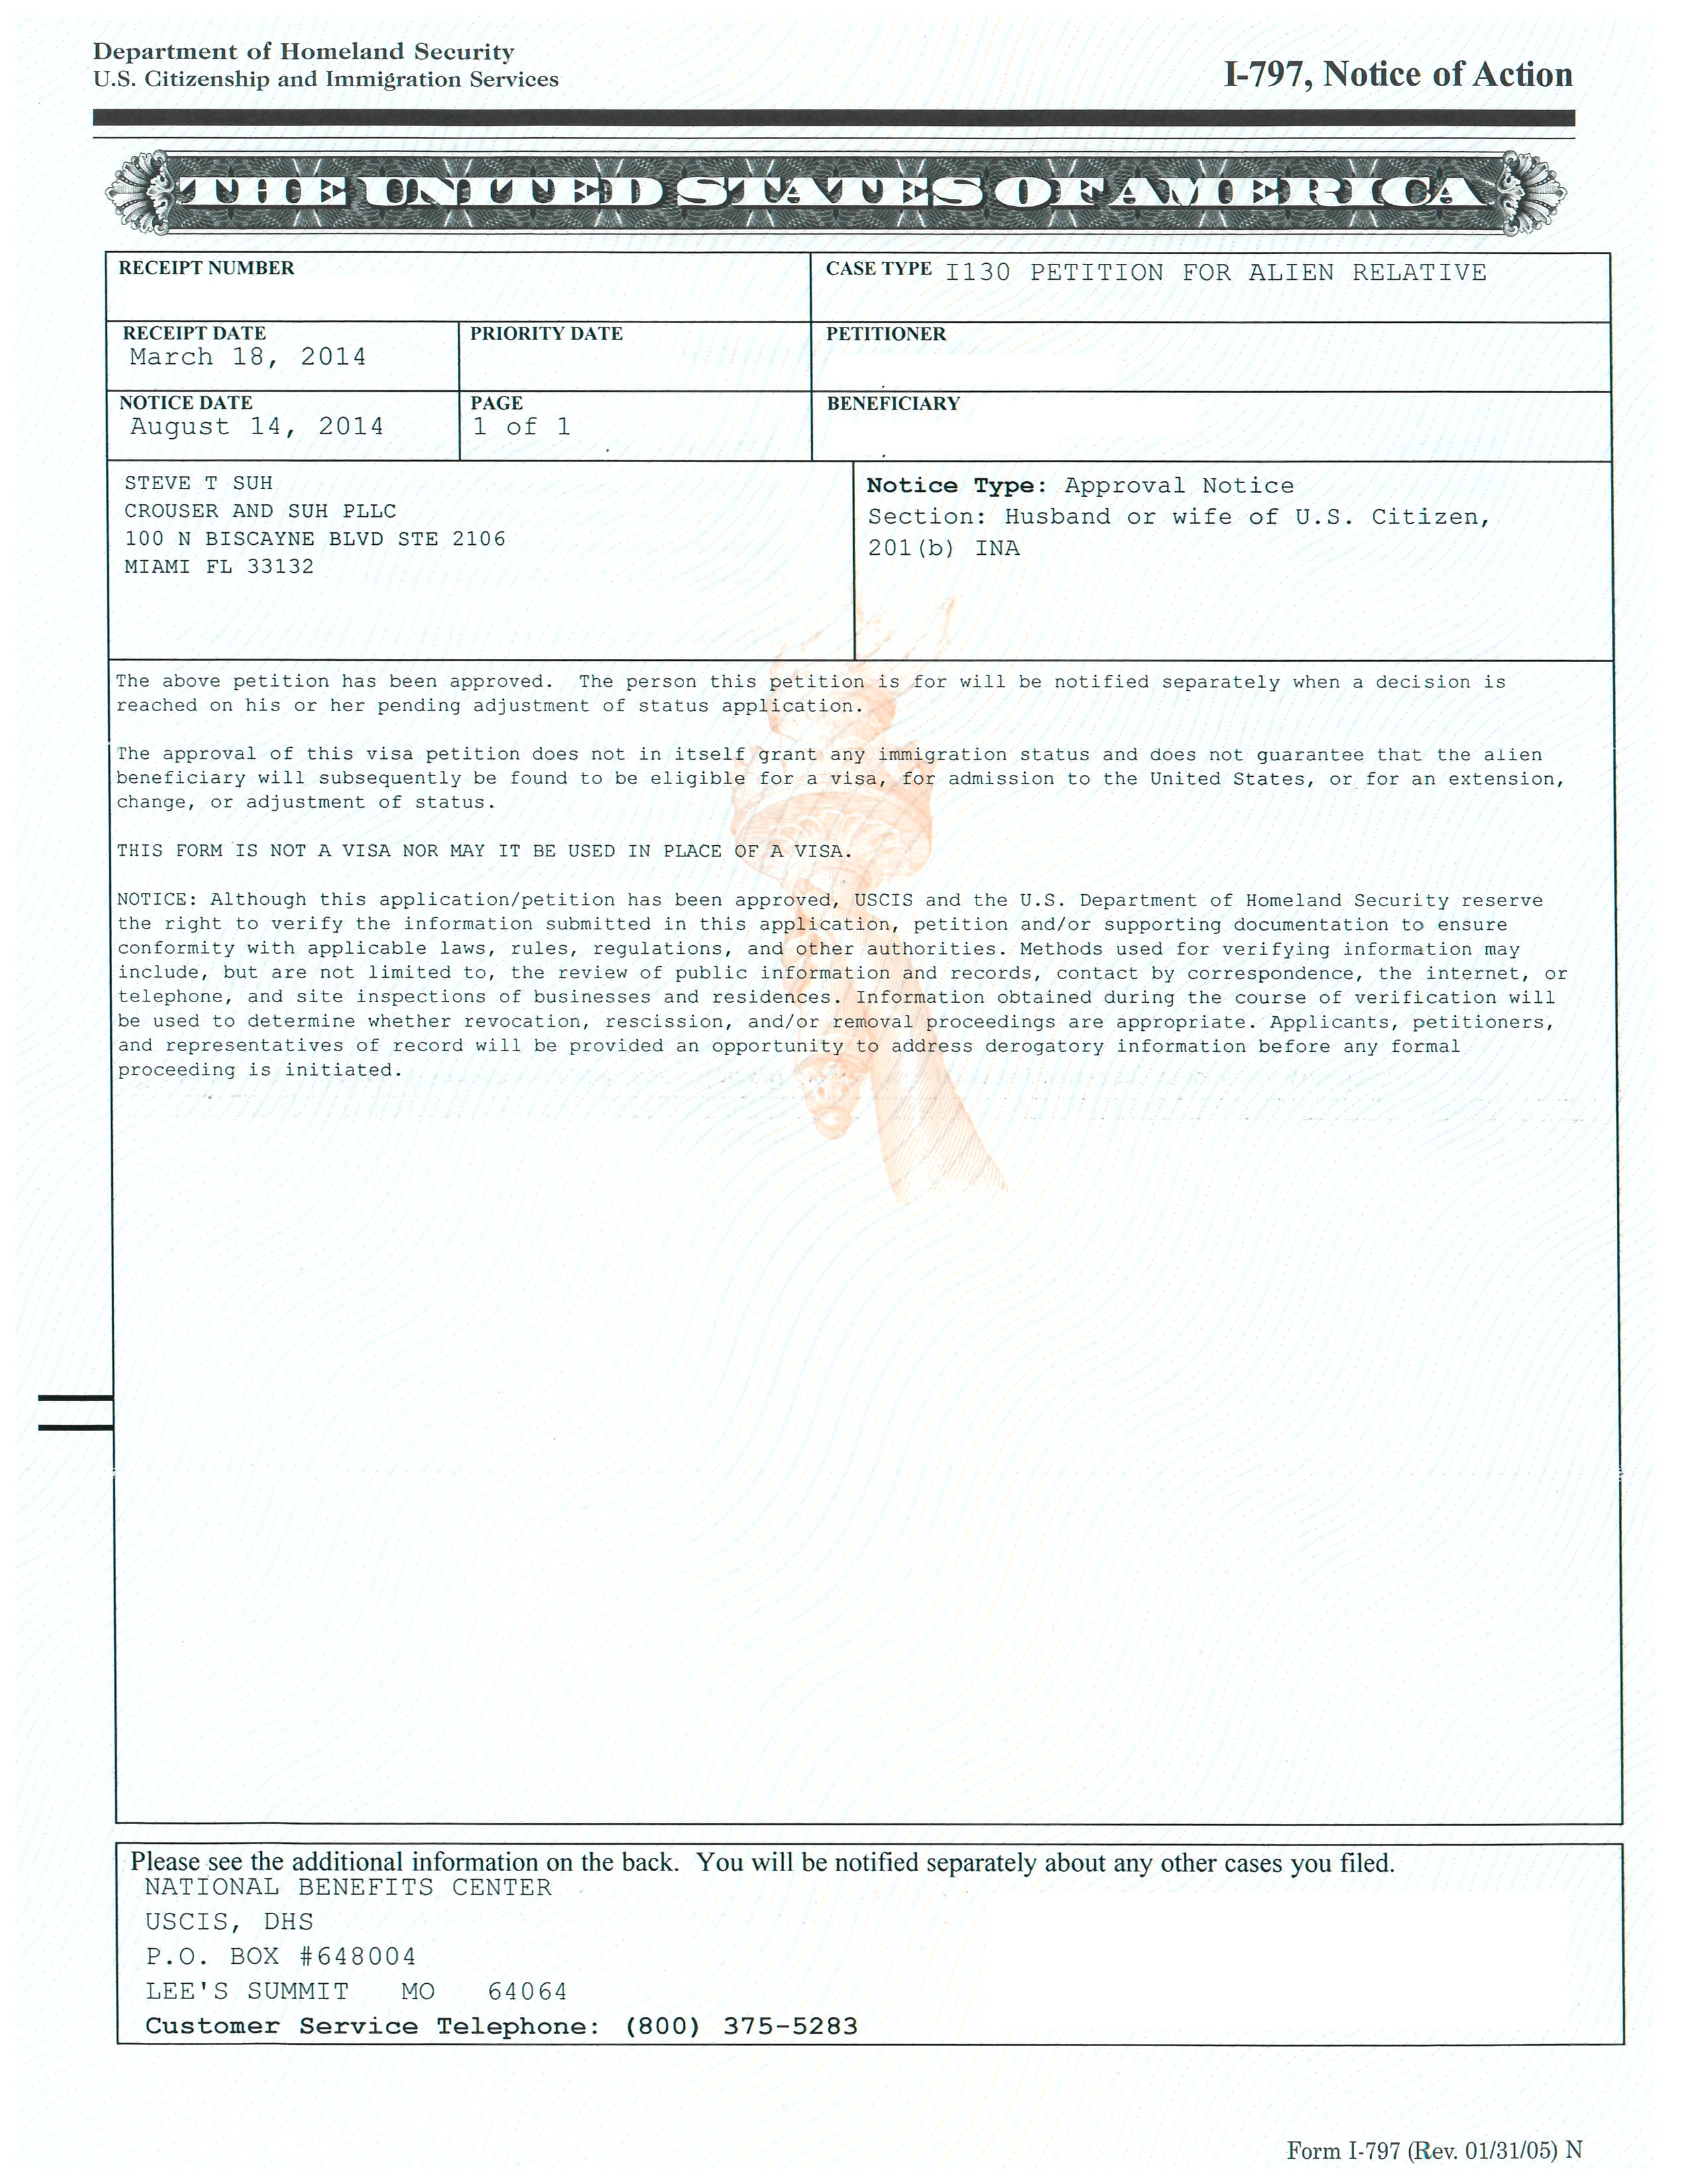 marriagepetitionapprovalnotice08142014.jpg